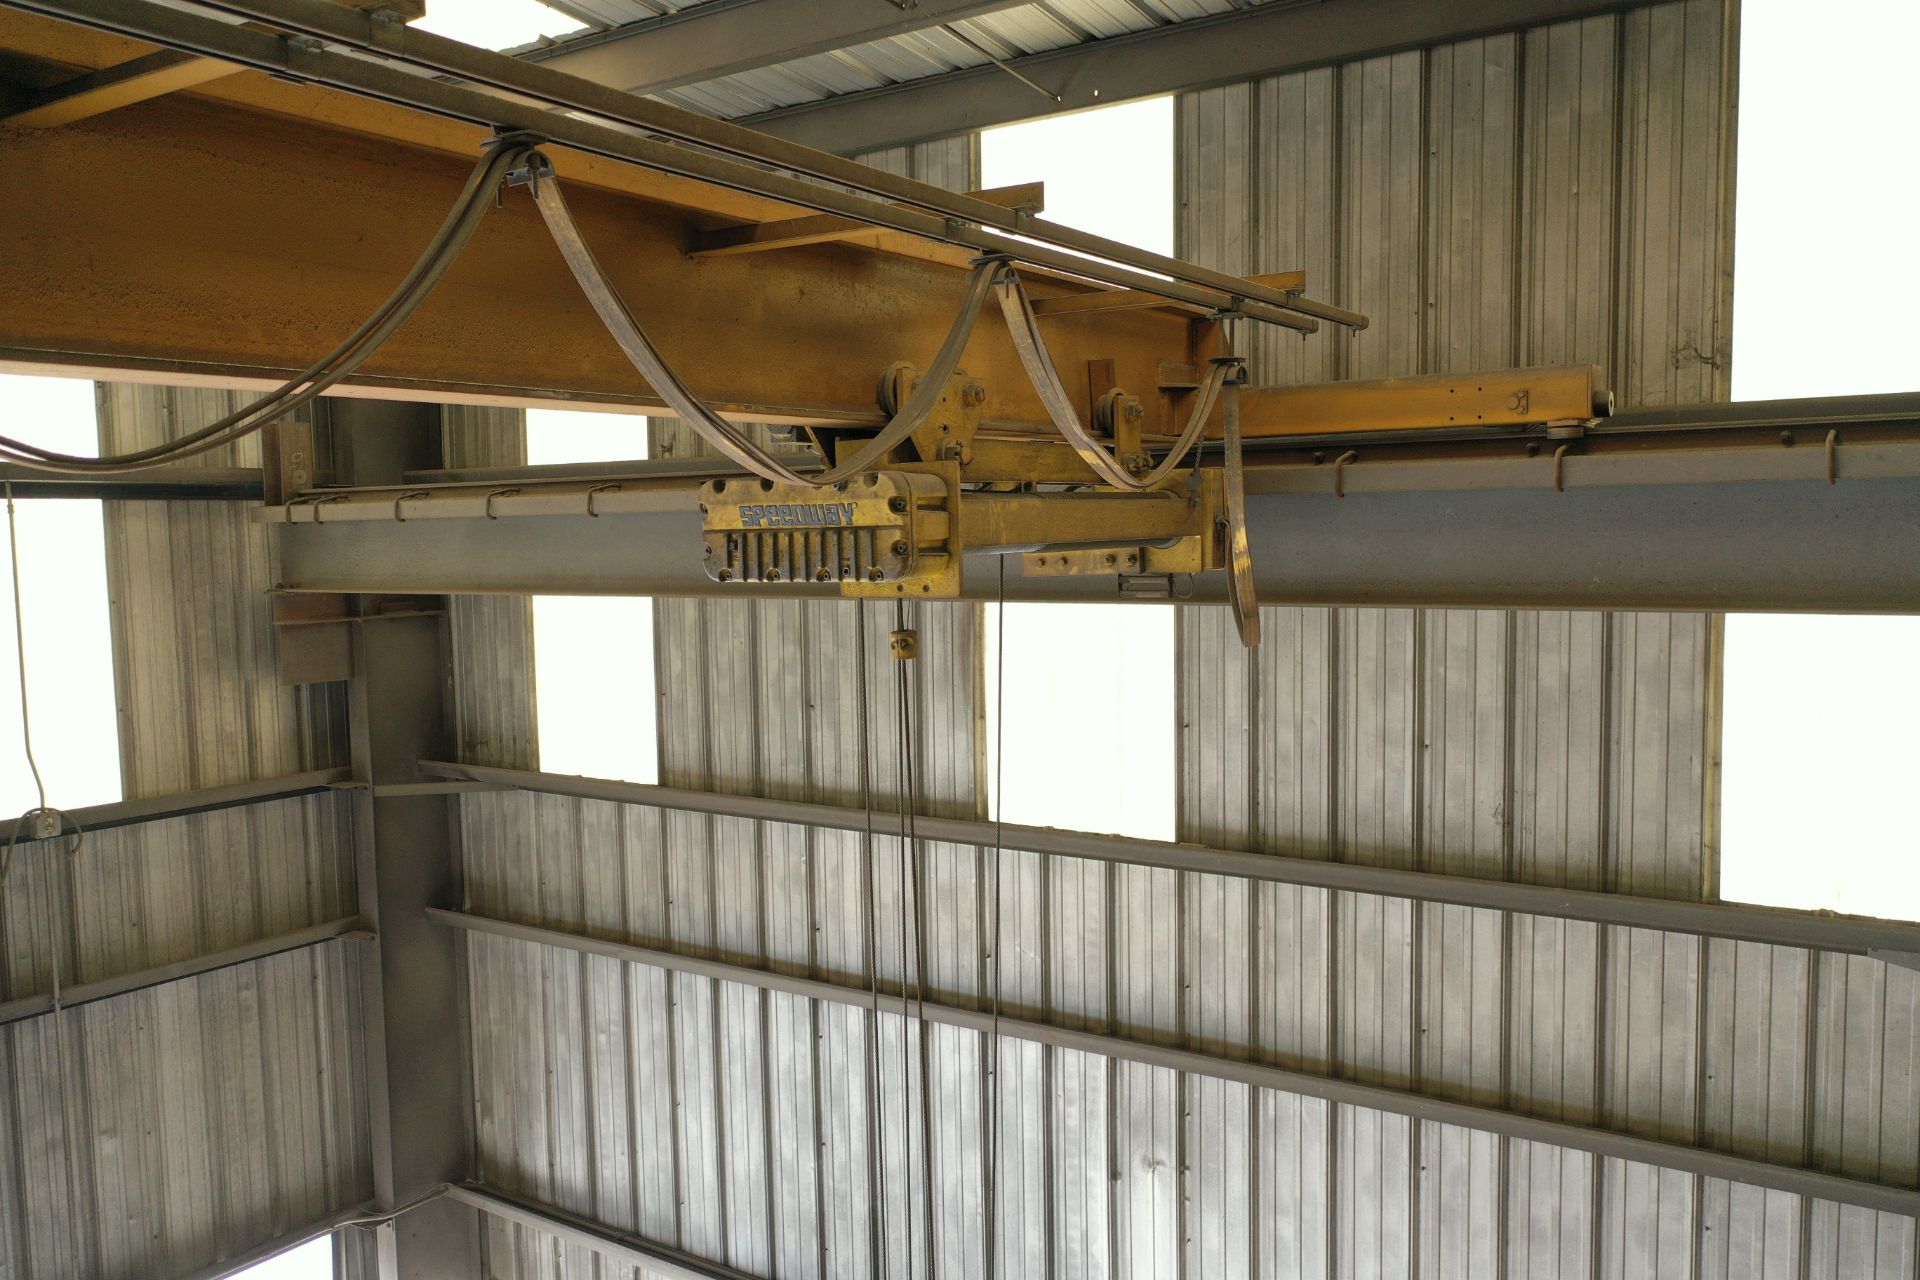 Evans 3 Ton Overhead Crane SN: 2479B with 3 Ton Hoist & Pendant Control, Approx 40 ft Span (LOCATION - Image 3 of 7